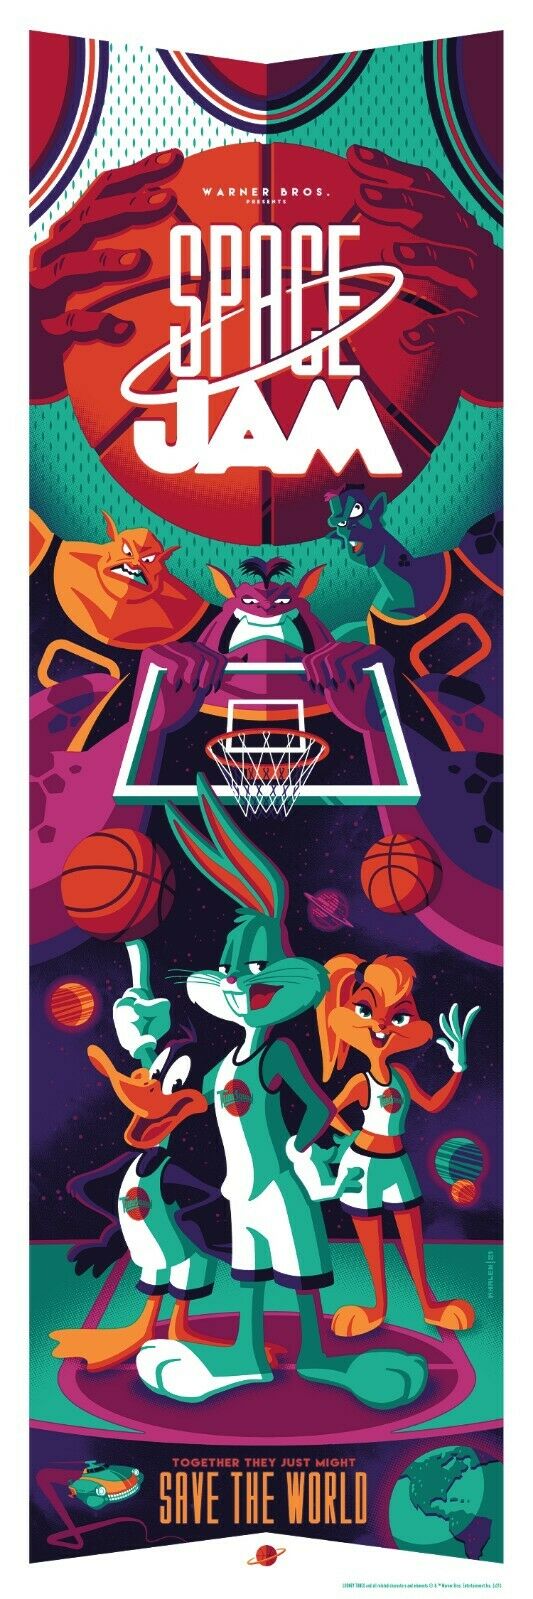 Space Jam (variant) by Tom Whalen, 12" x 36" Screen Print